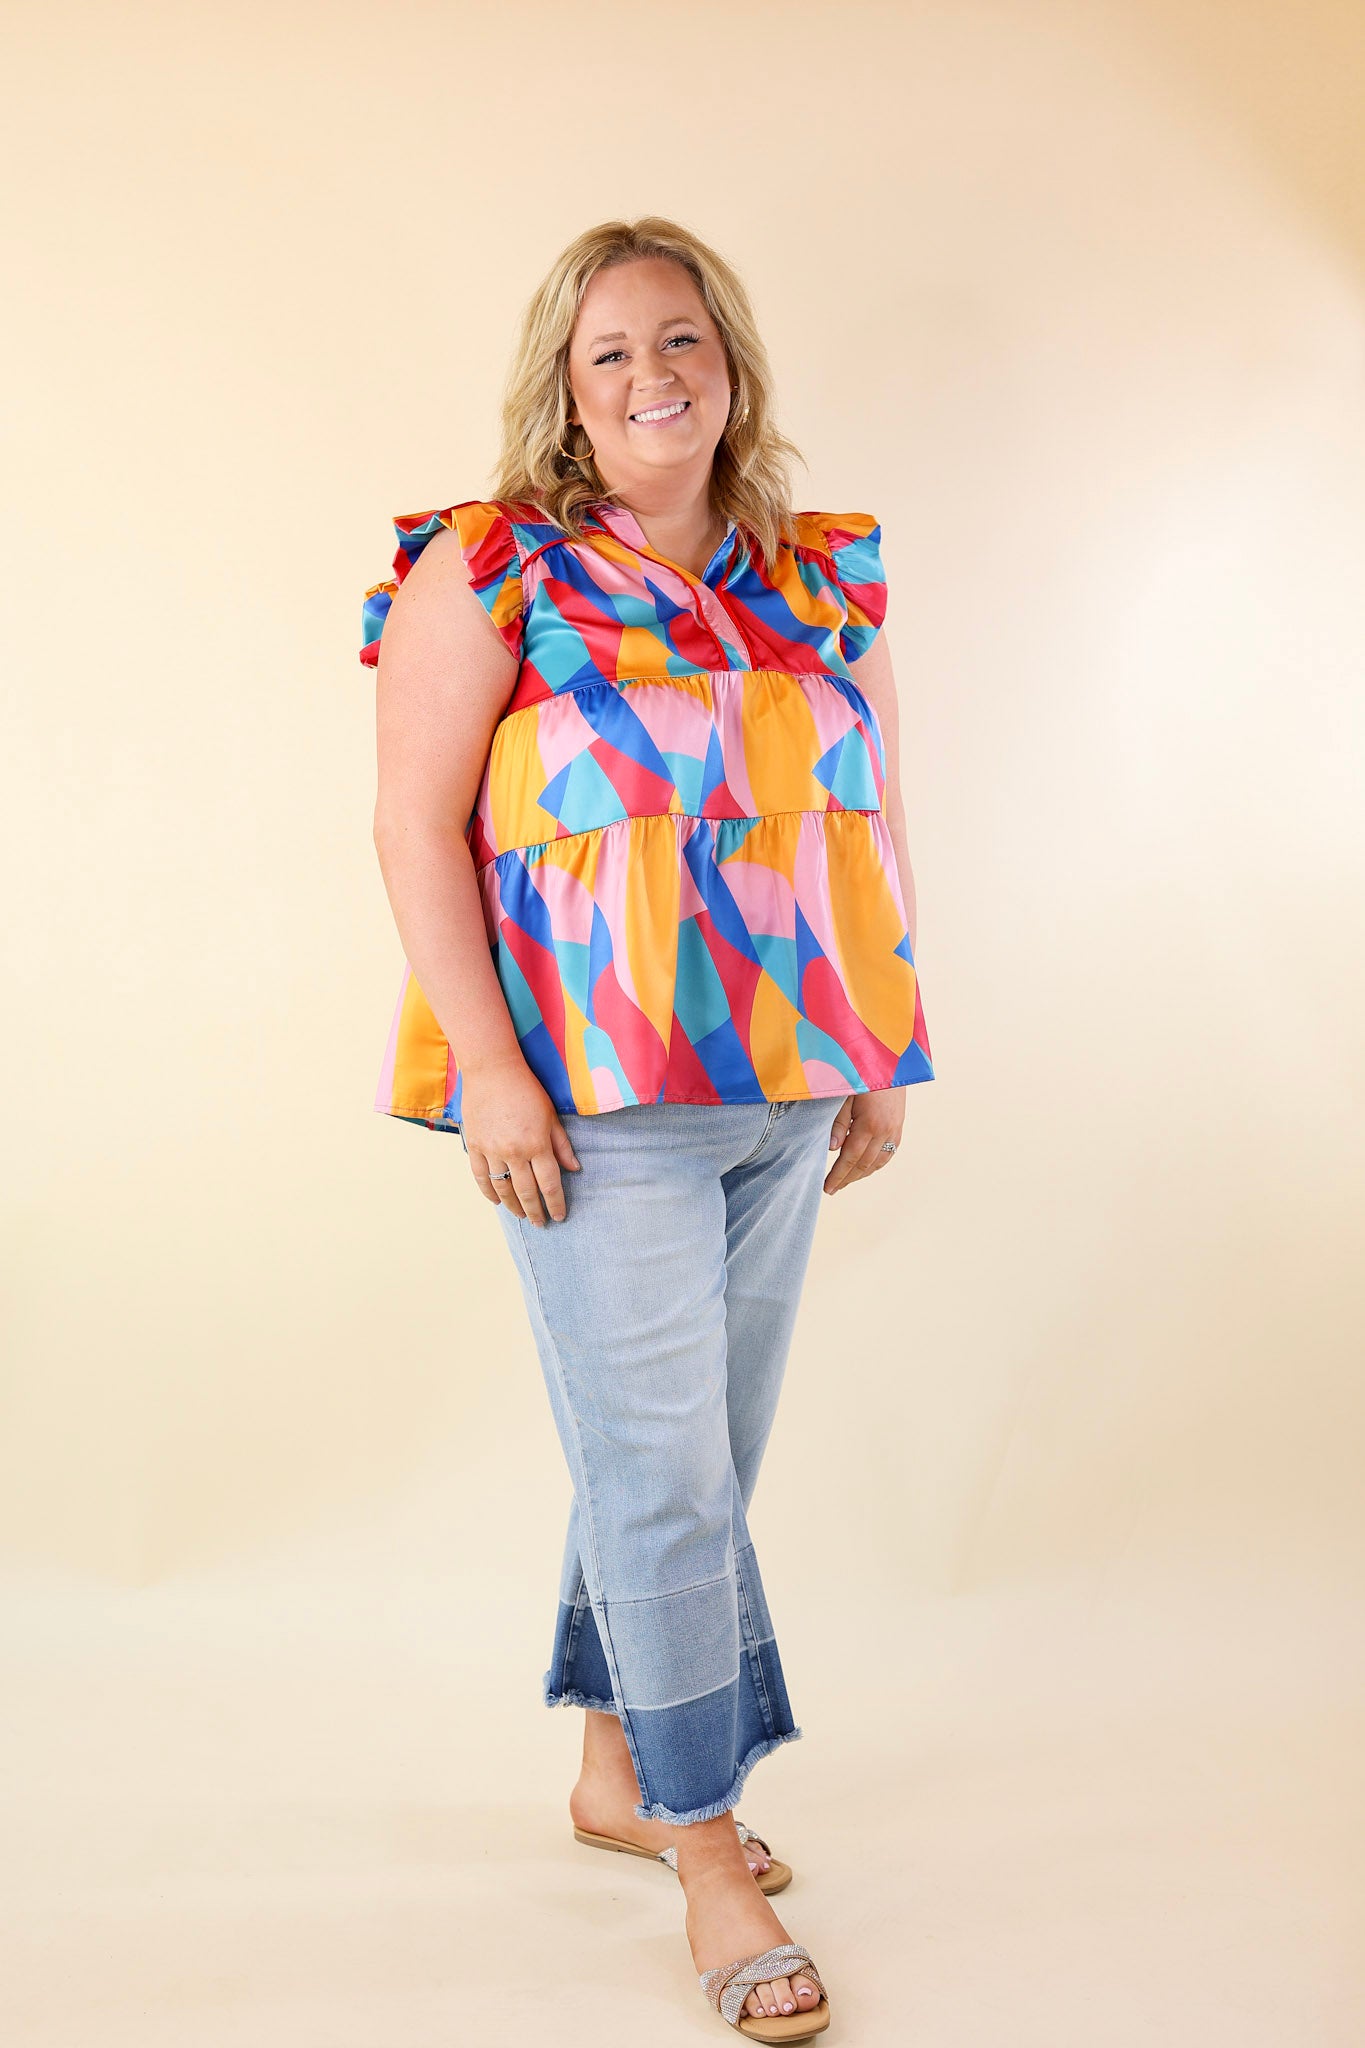 I Can't Wait V Neck with Ruffled Sleeves Top in Multicolor - Giddy Up Glamour Boutique